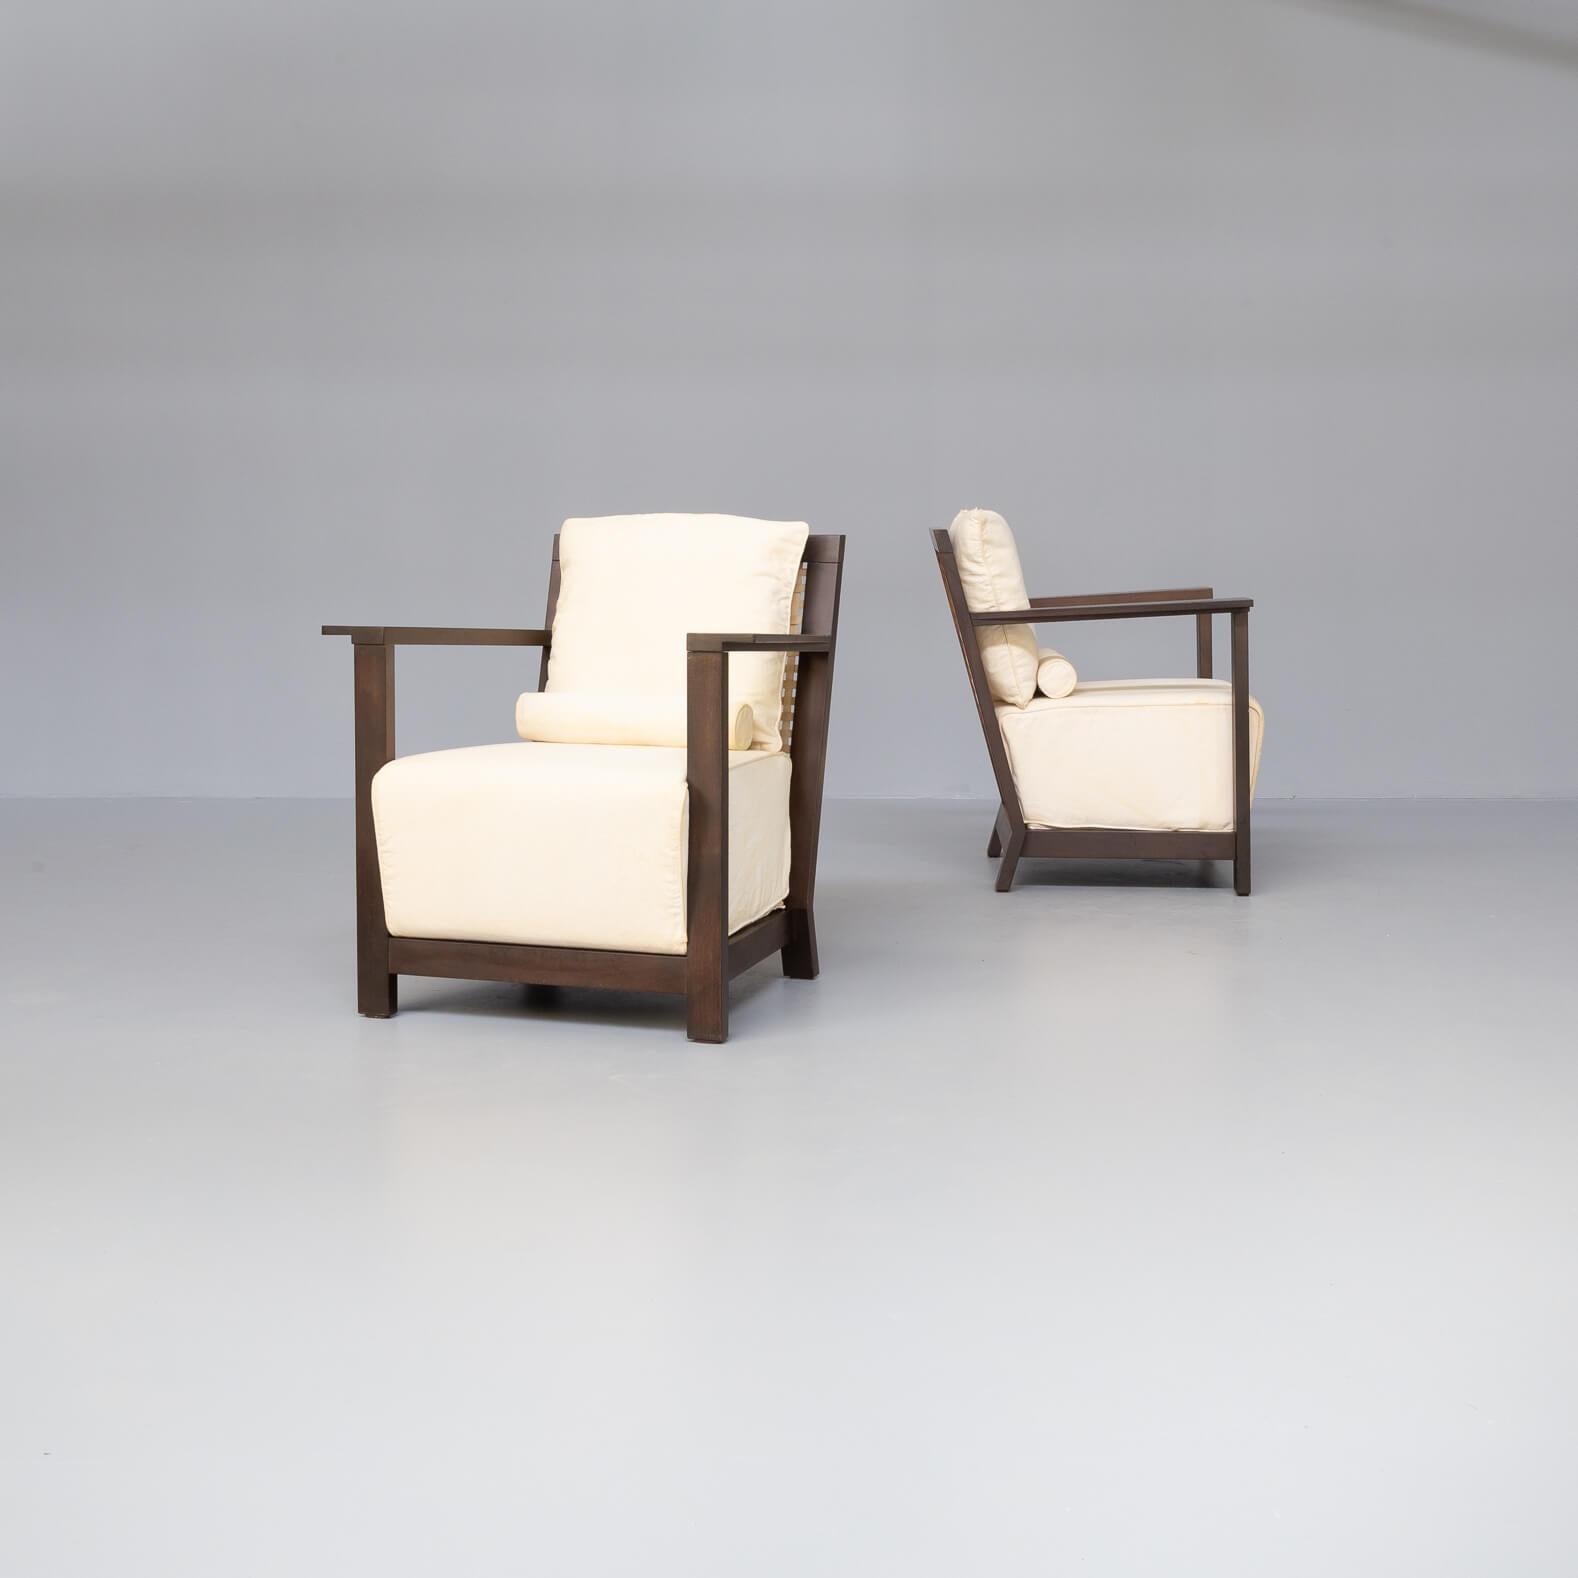 The Otto 111 lounge chairs have been designed bij Paola Navone in her duty as artistic director of the brand. Luxury feeling combined with normality. These set of two are in good condition consistent with age and use. The flexible fabric can be